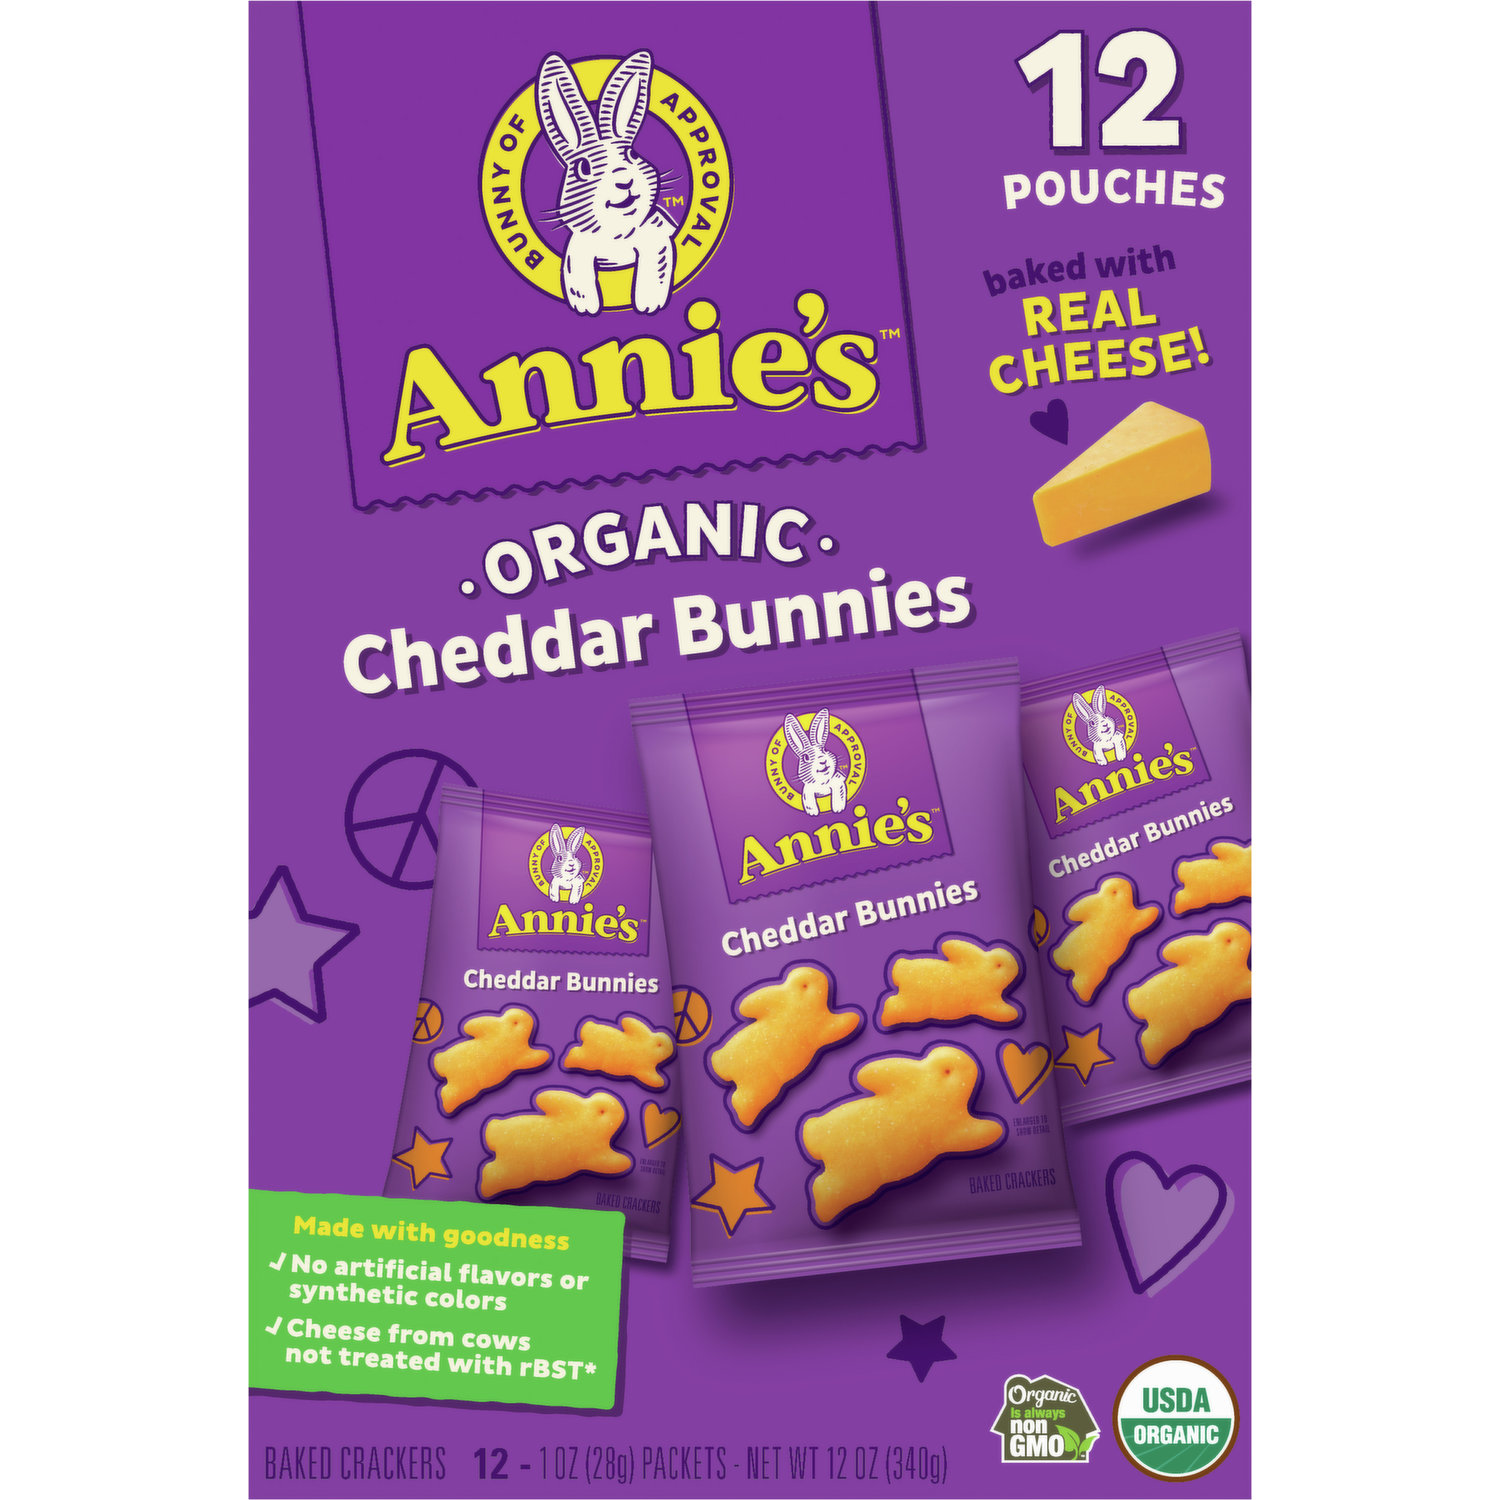 Annie's Organic Cheddar Bunnies Baked Snack Crackers, 12 oz., 12 Pouches 